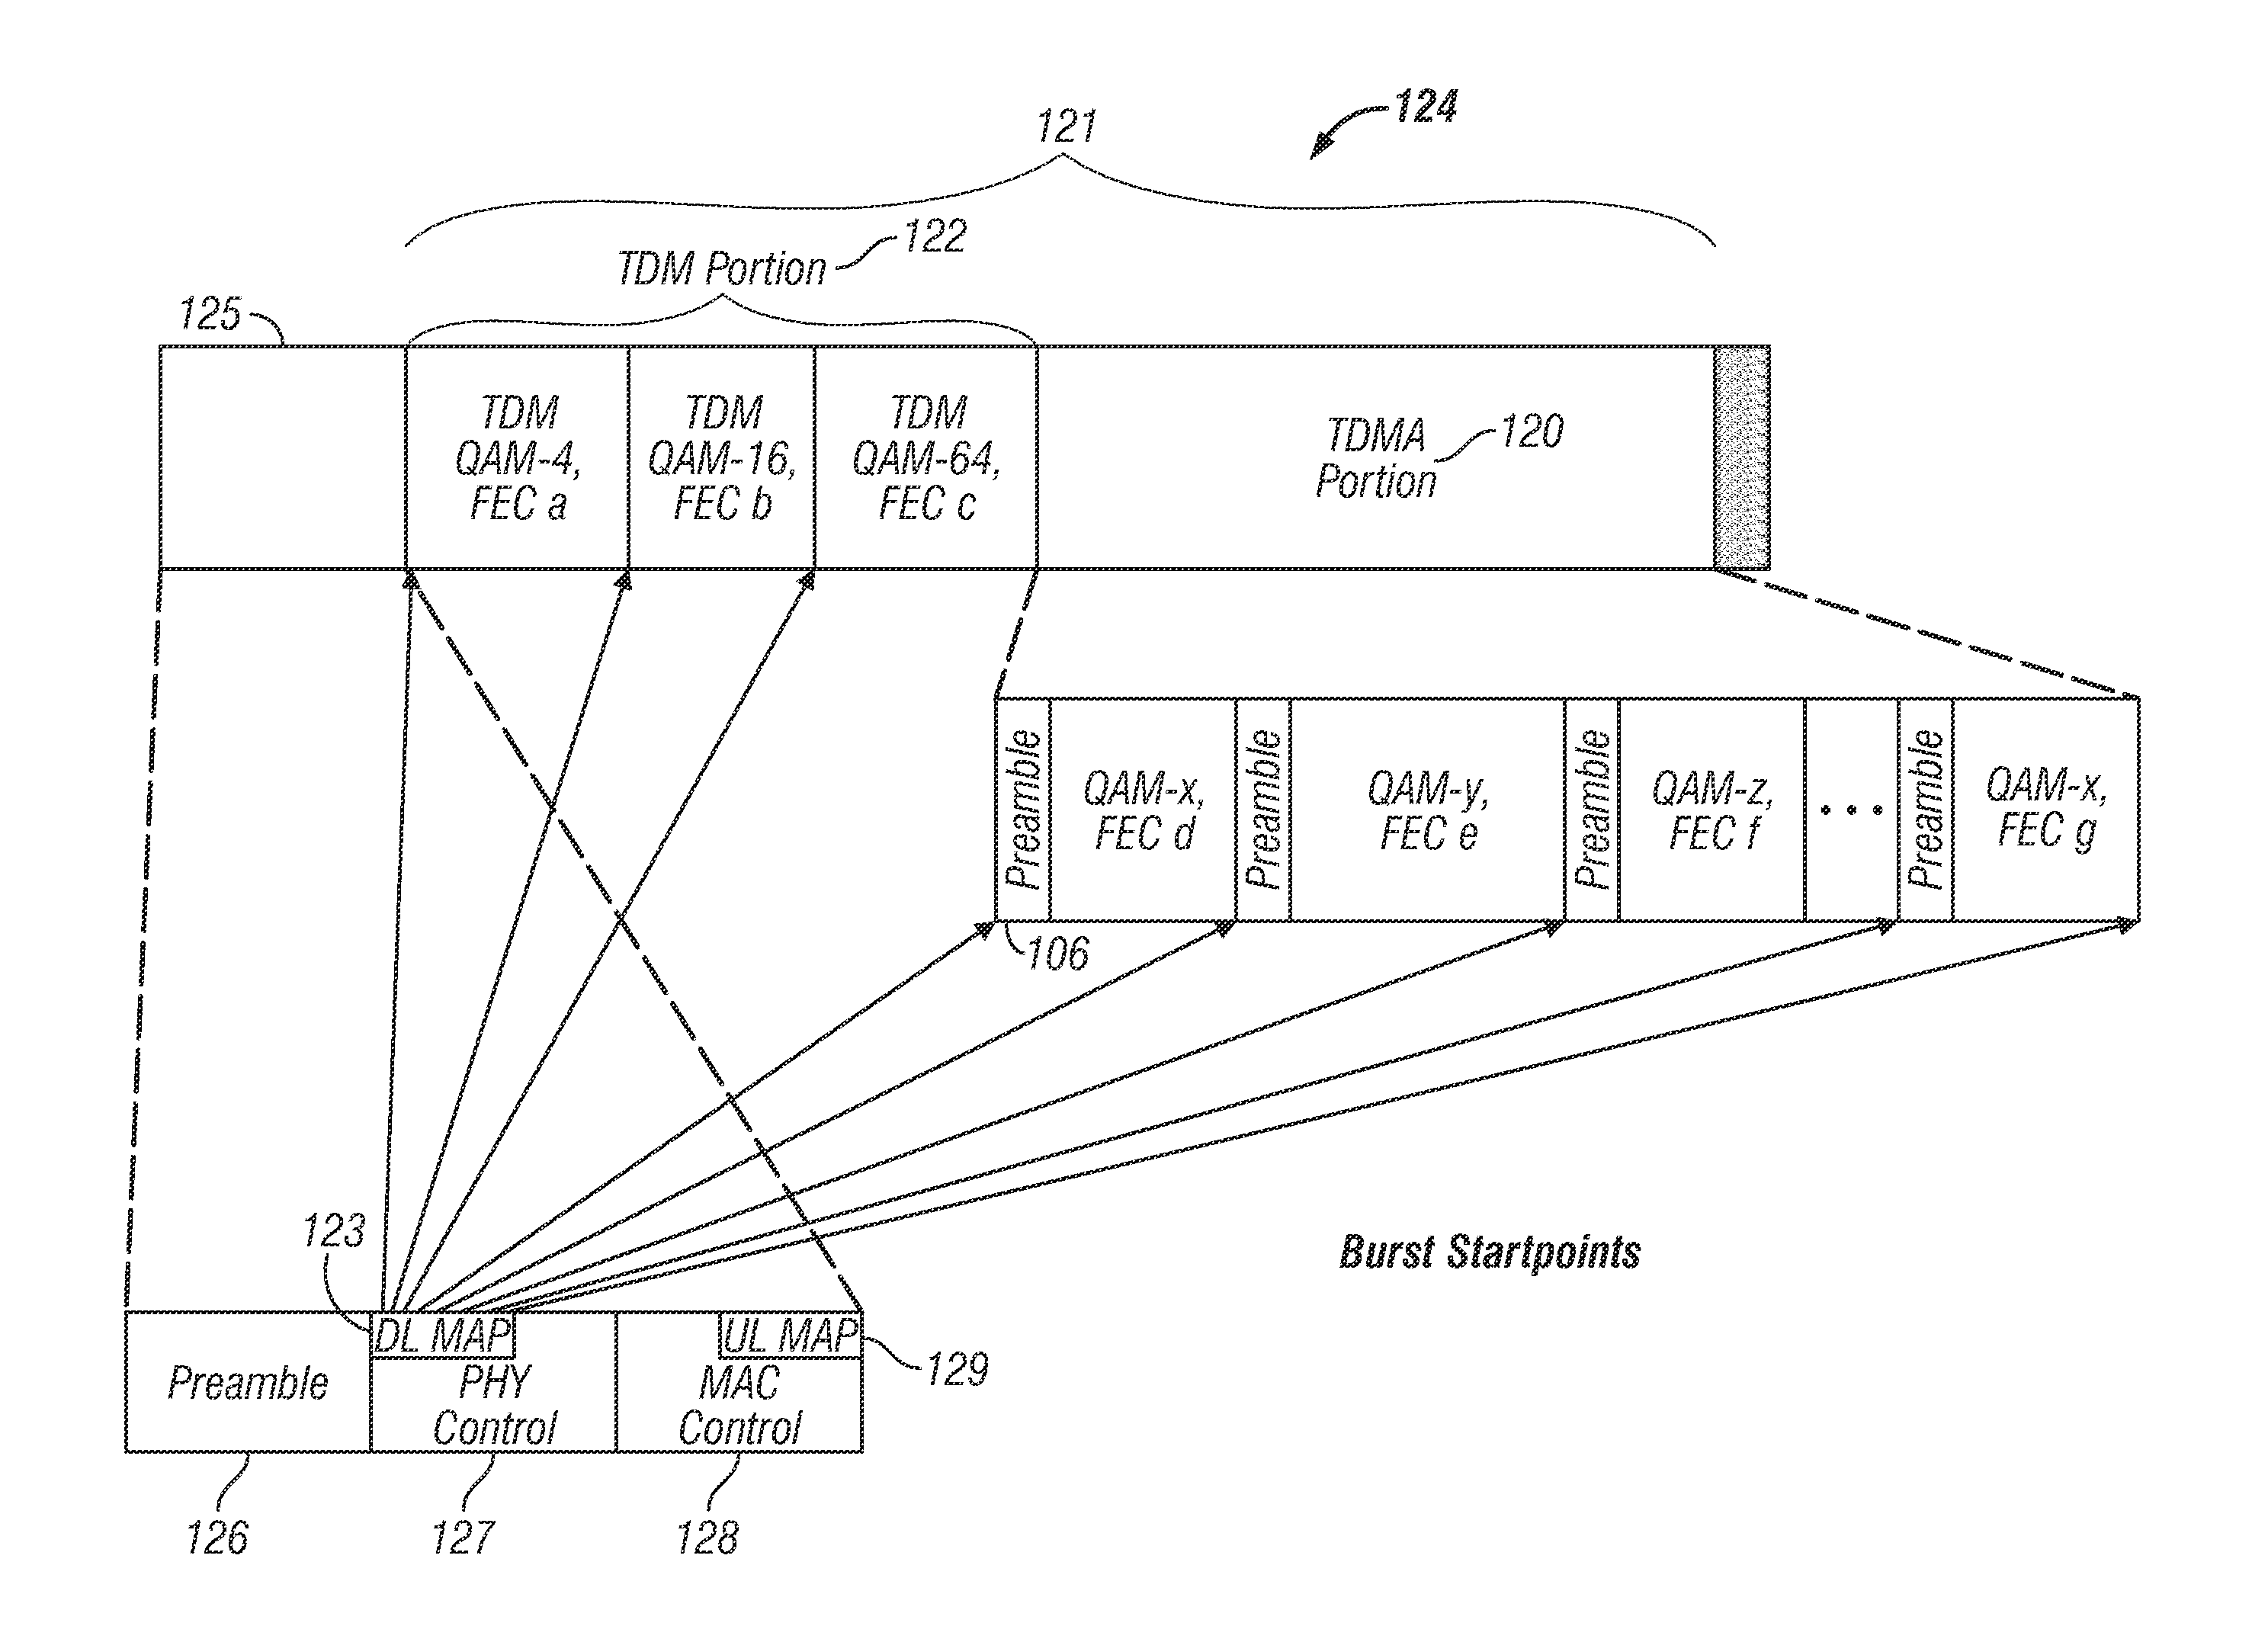 Framing for an adaptive modulation communication system